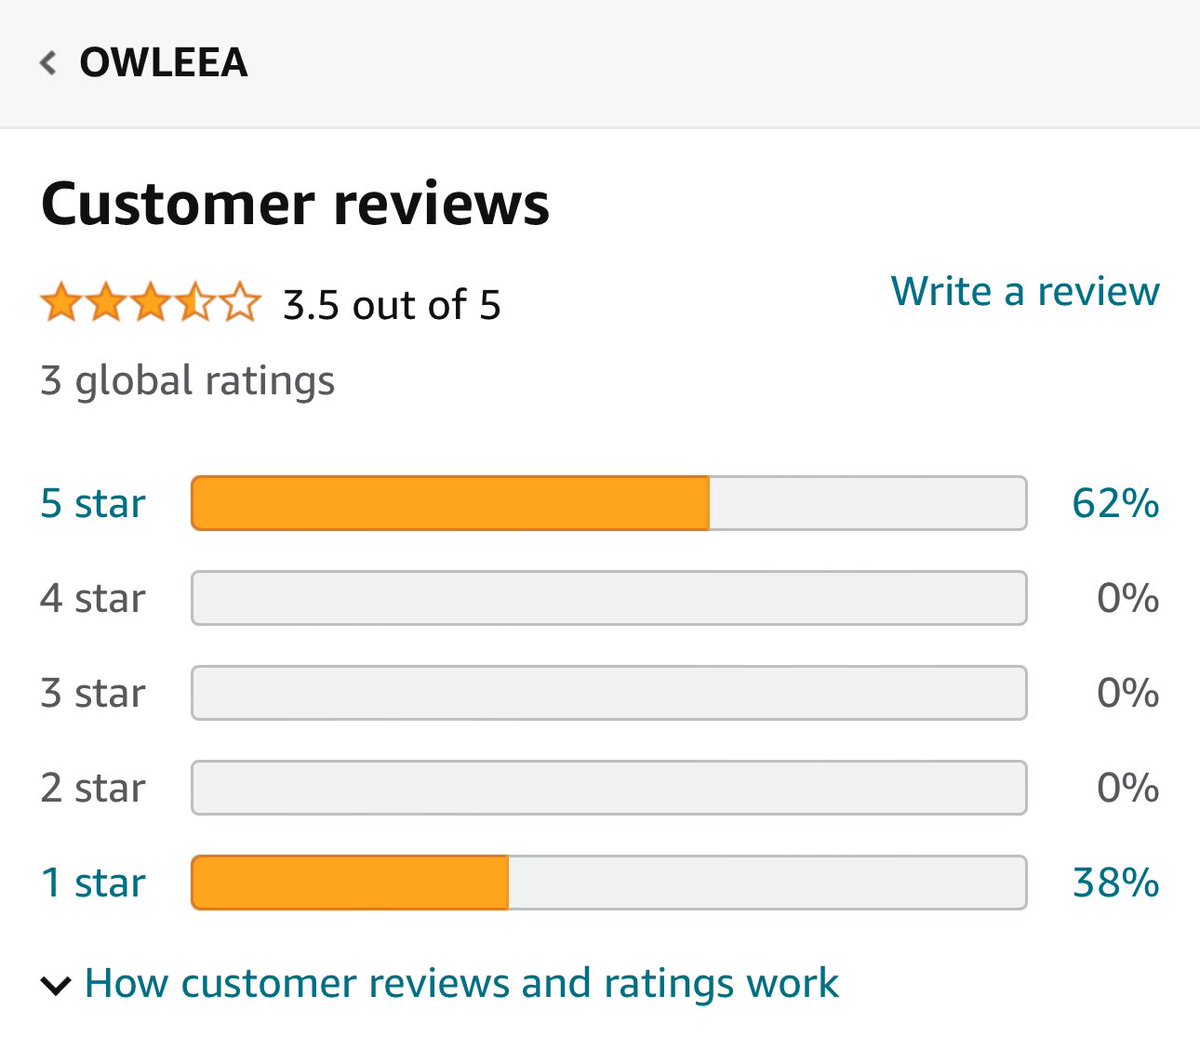 Oh look Owleea got an anonymous 1 star review. Let’s get #Owleea to #1 on @amazon 🦉amzn.to/3Wz5aa6 #hateisweak